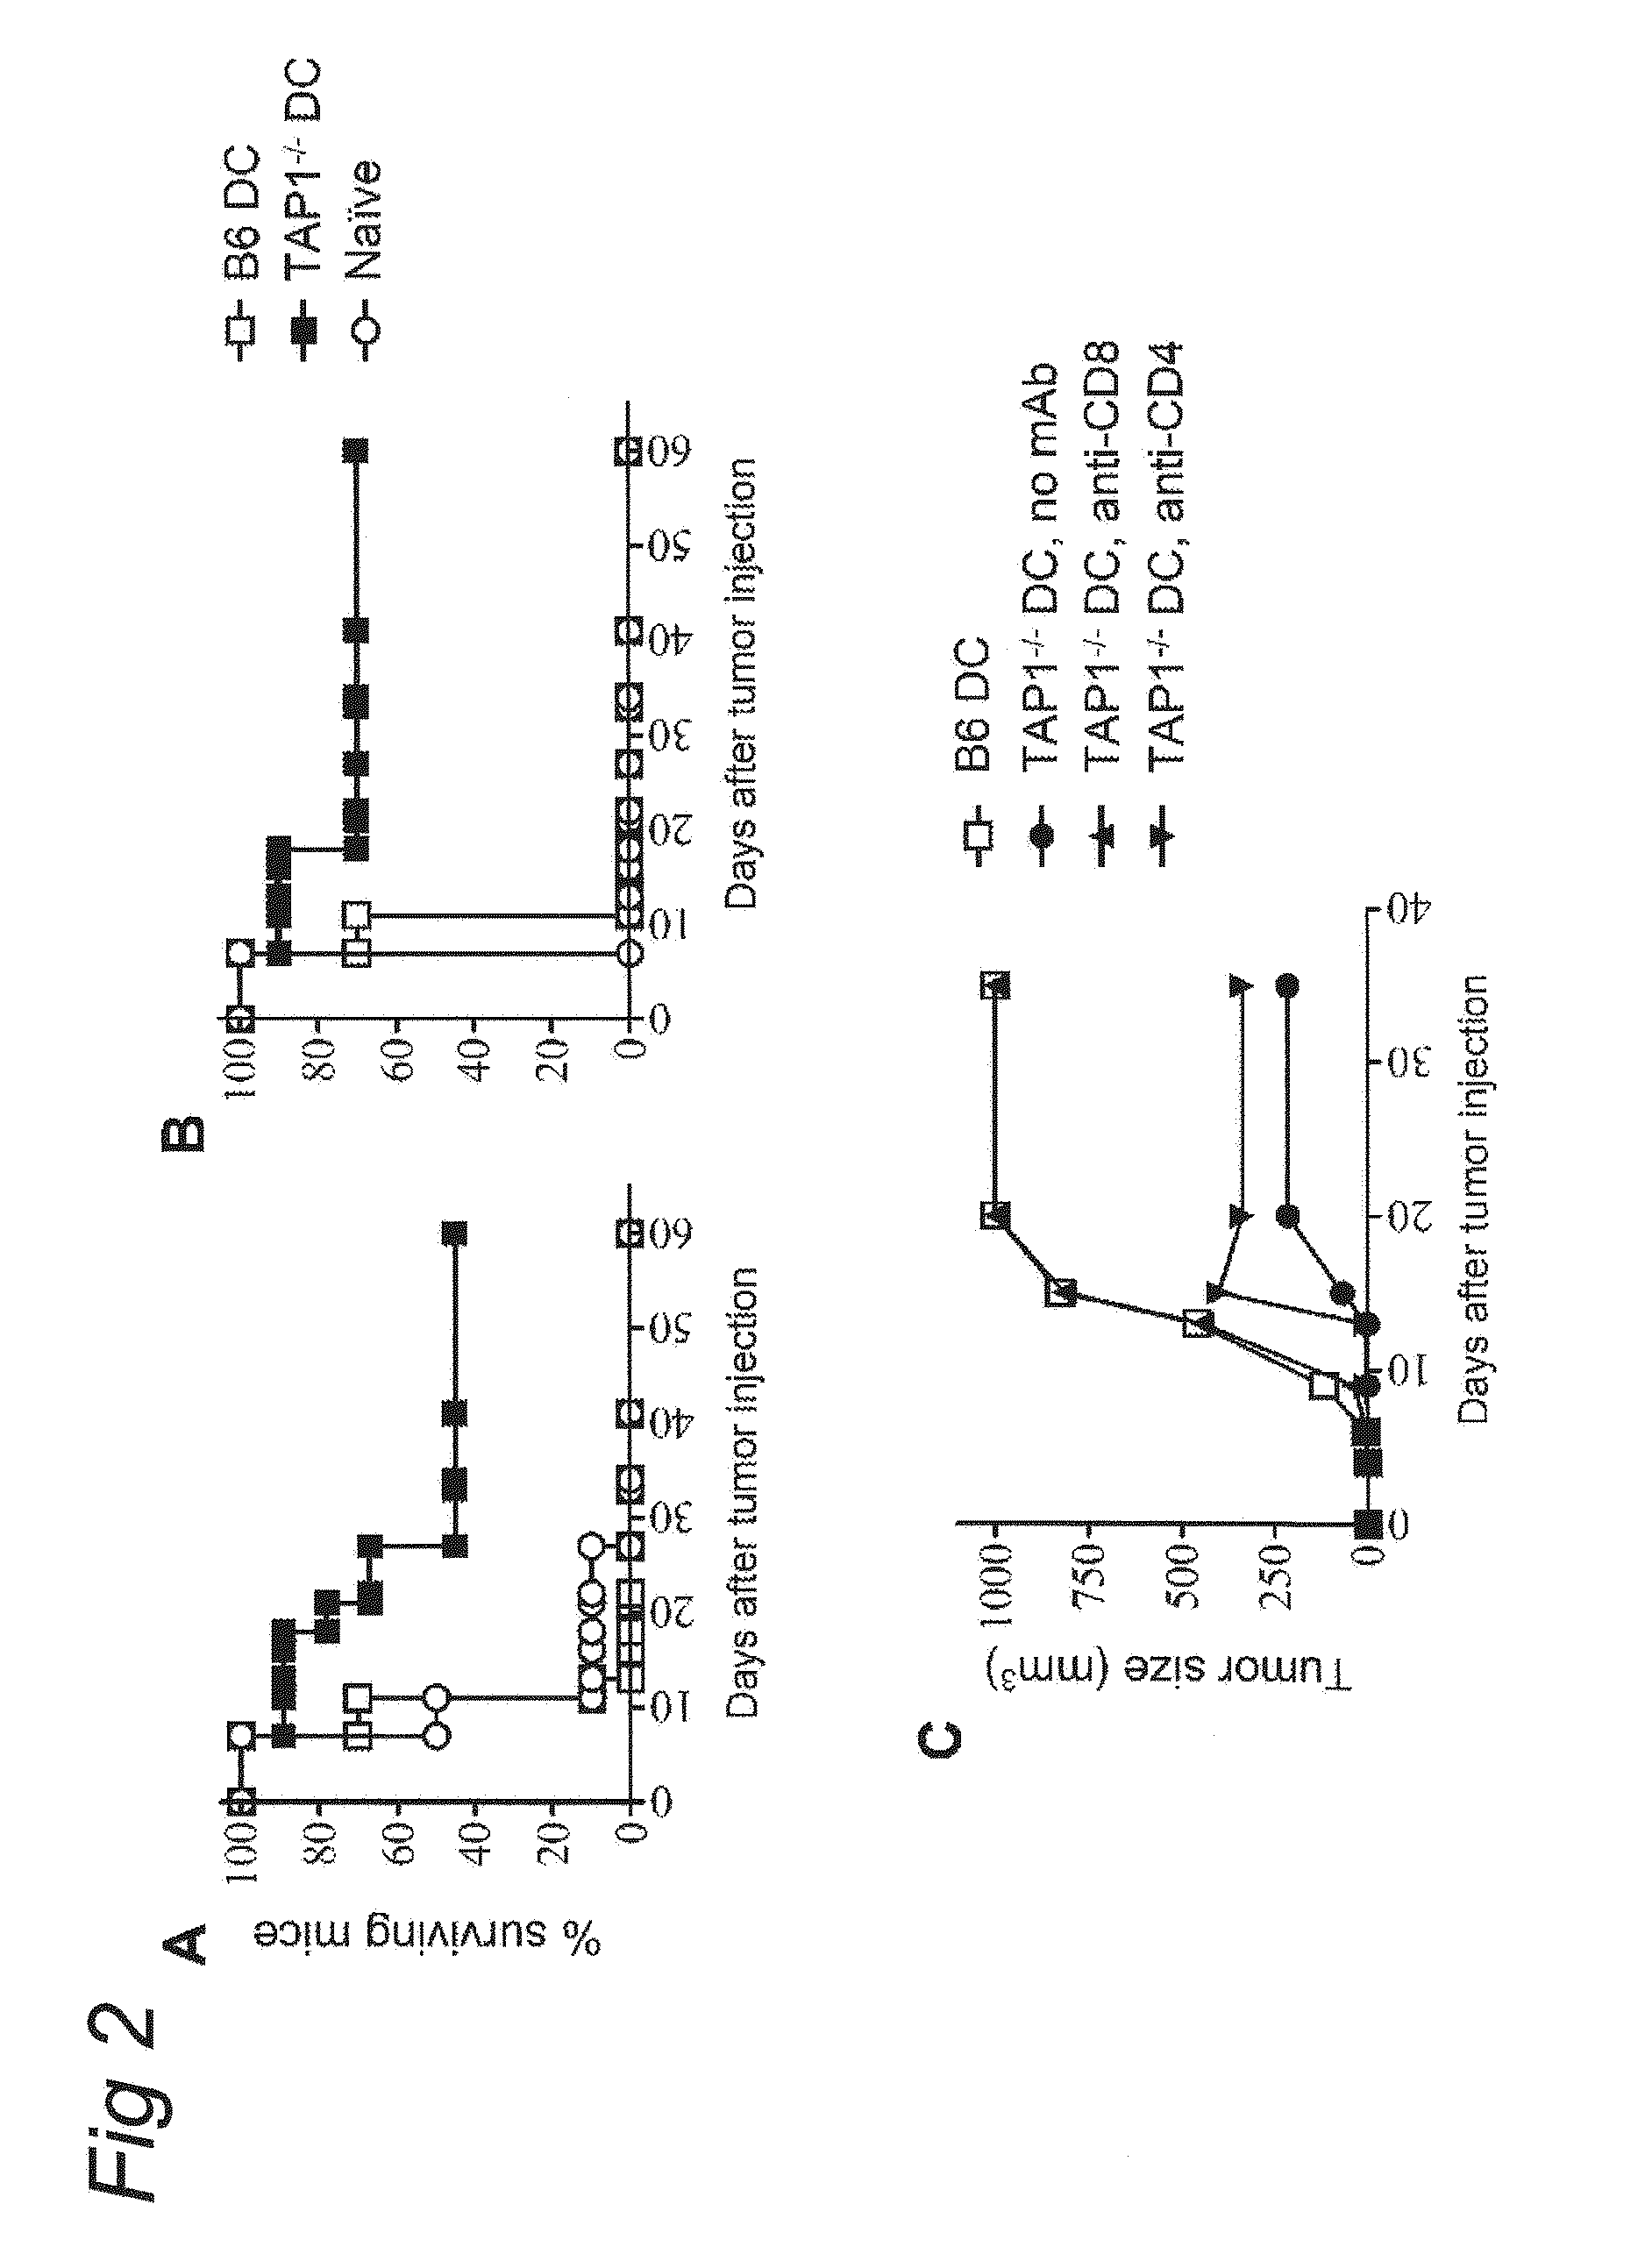 Use of a varicellovirus tap-inhibitor for the induction of tumor-or virus-specific immunity against teipp